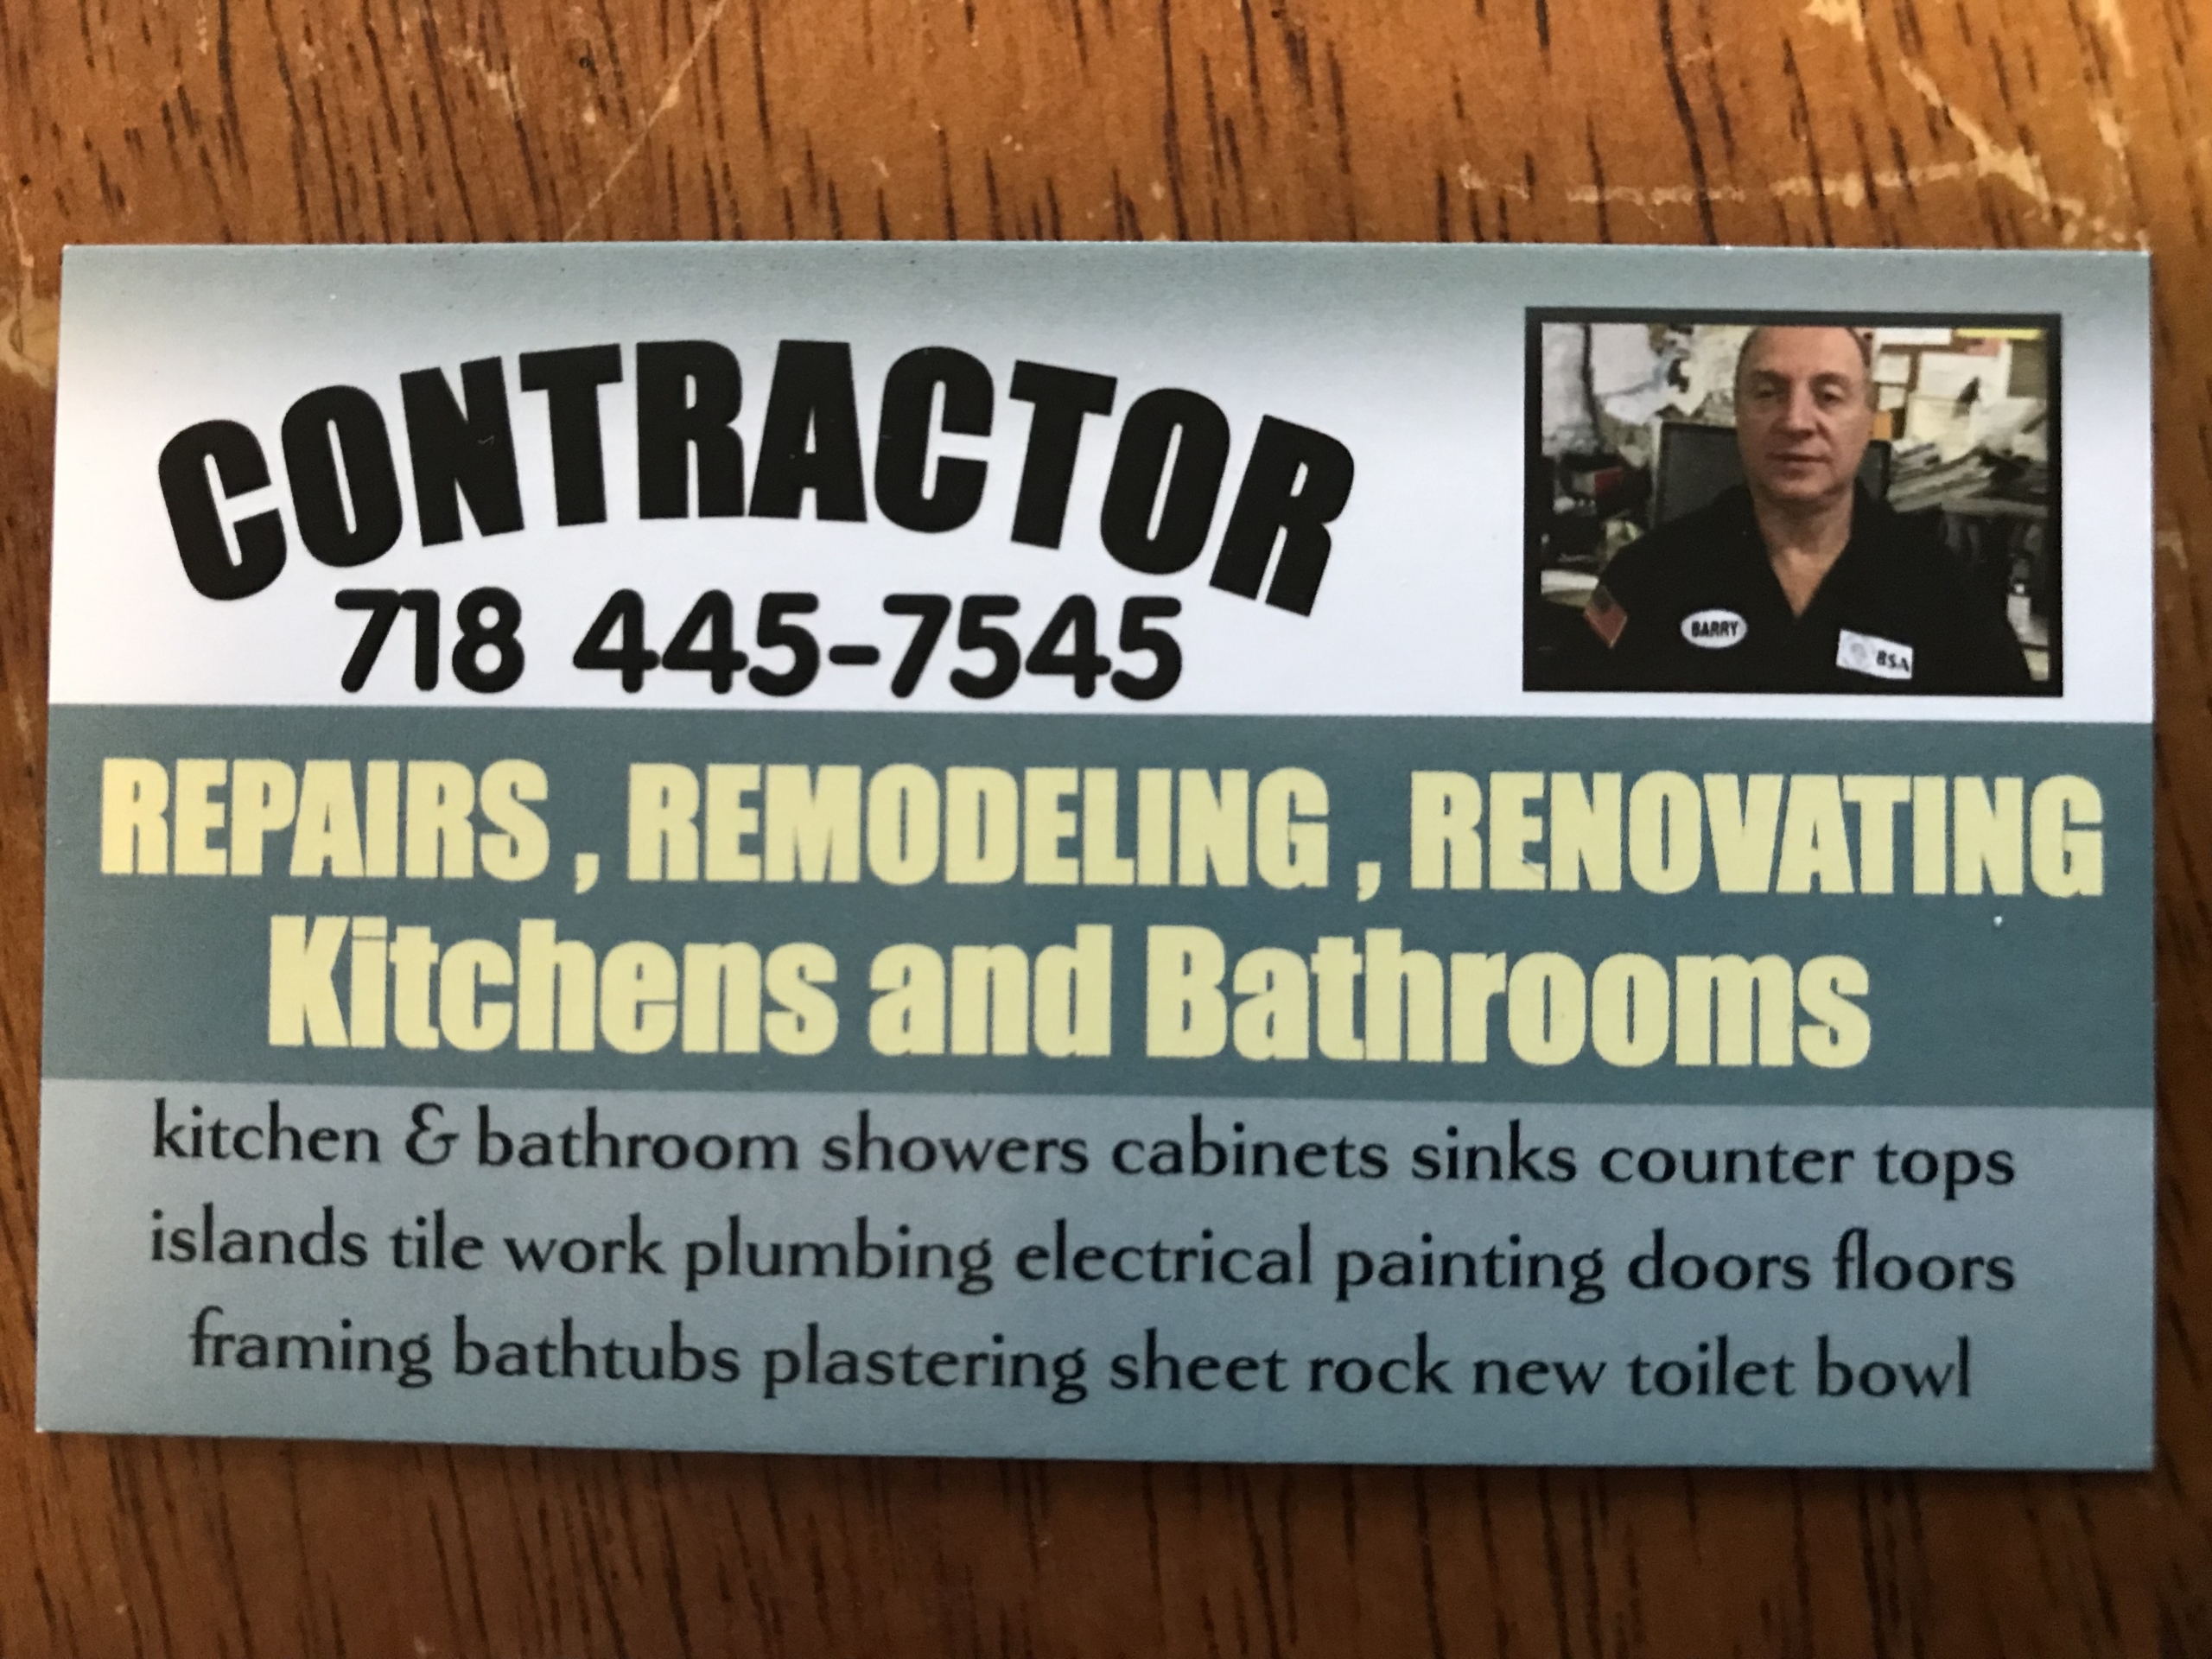 BSA Home Improvement Contractor / Handyman S Corp.       Flushing N Y, (718) 445-7545